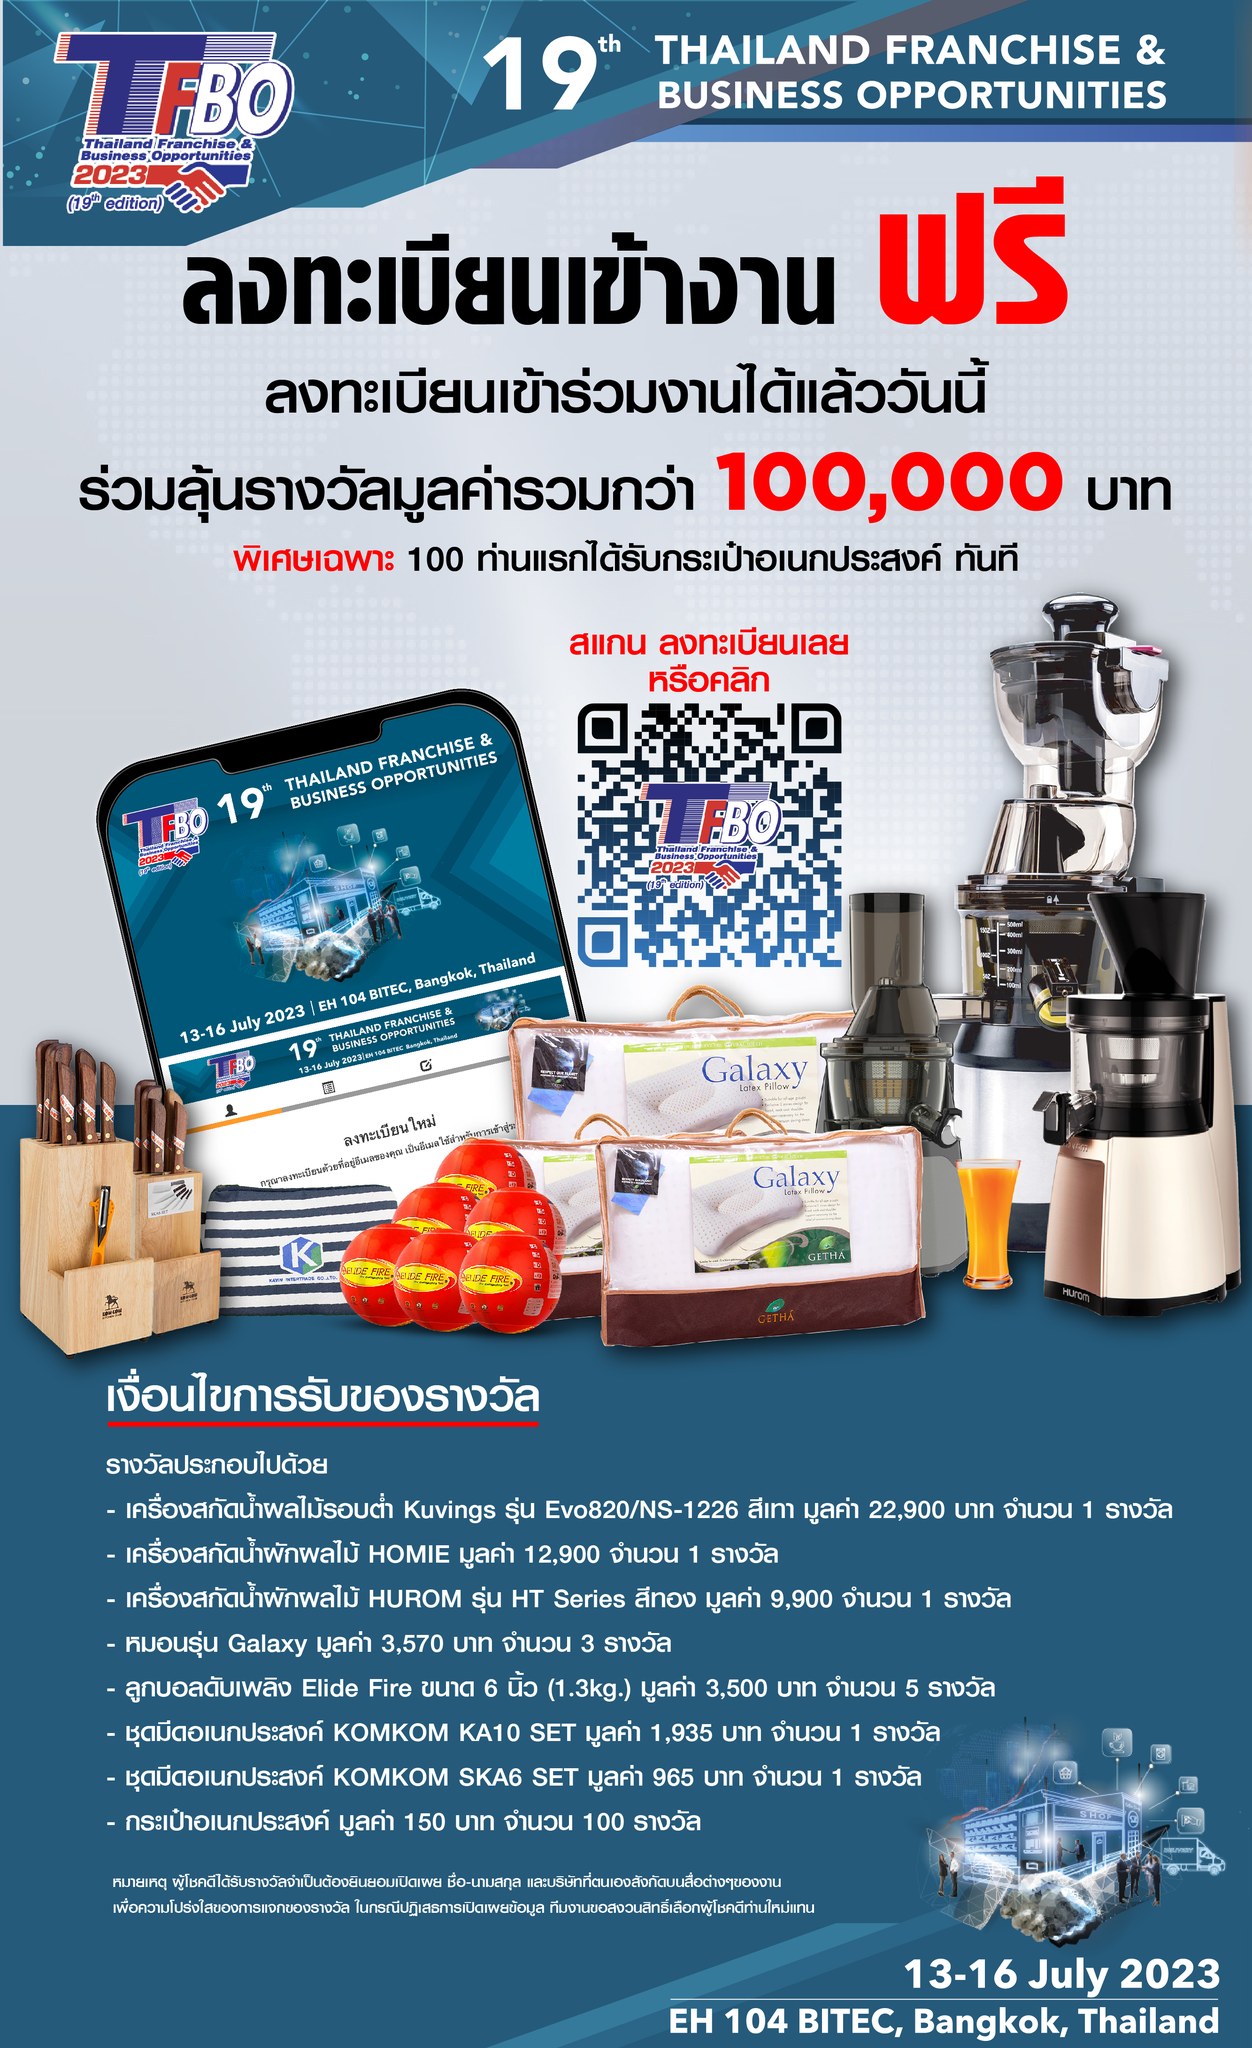 The 19th Thailand Franchise & Business Opportunities (TFBO 2023)